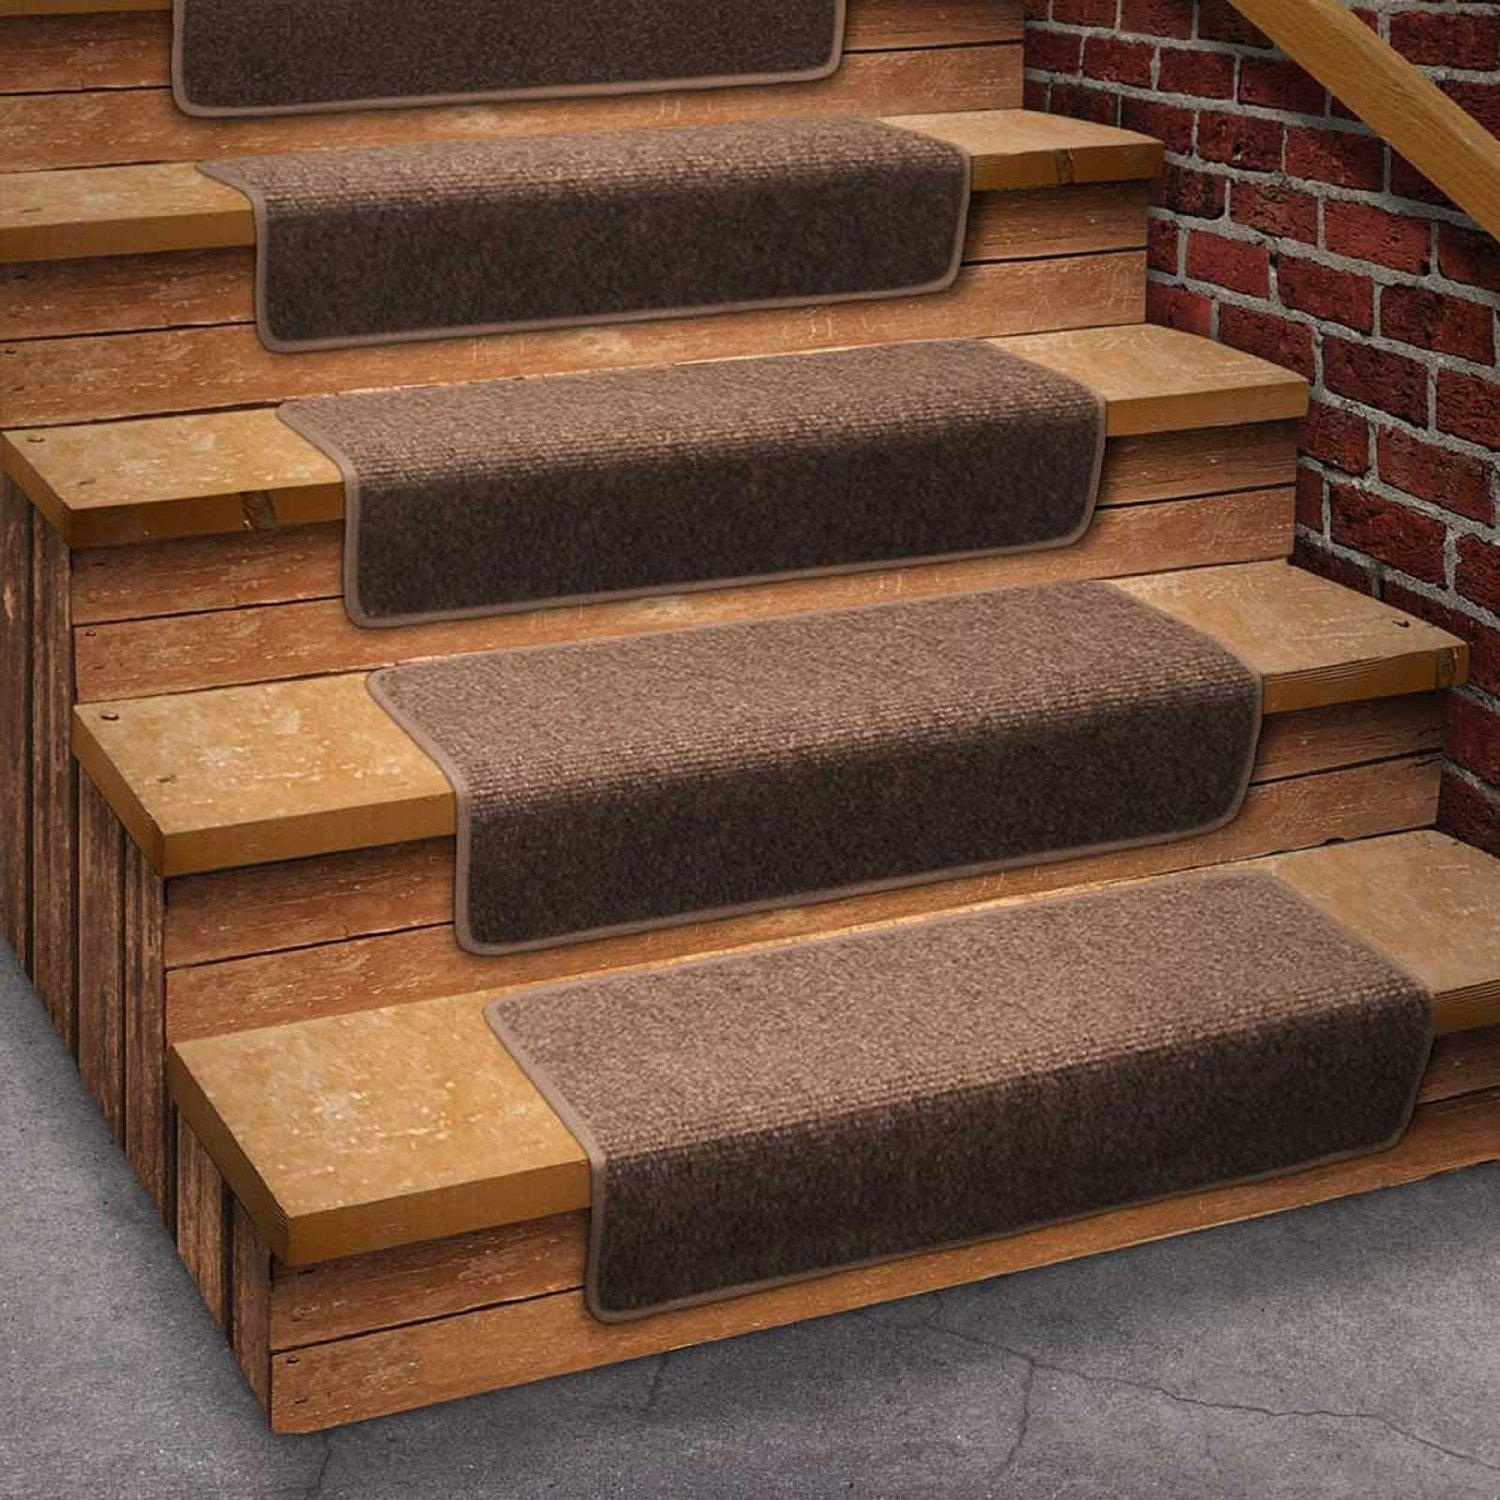 13 Attachable Basement Step Carpet Stair Treads - Gray